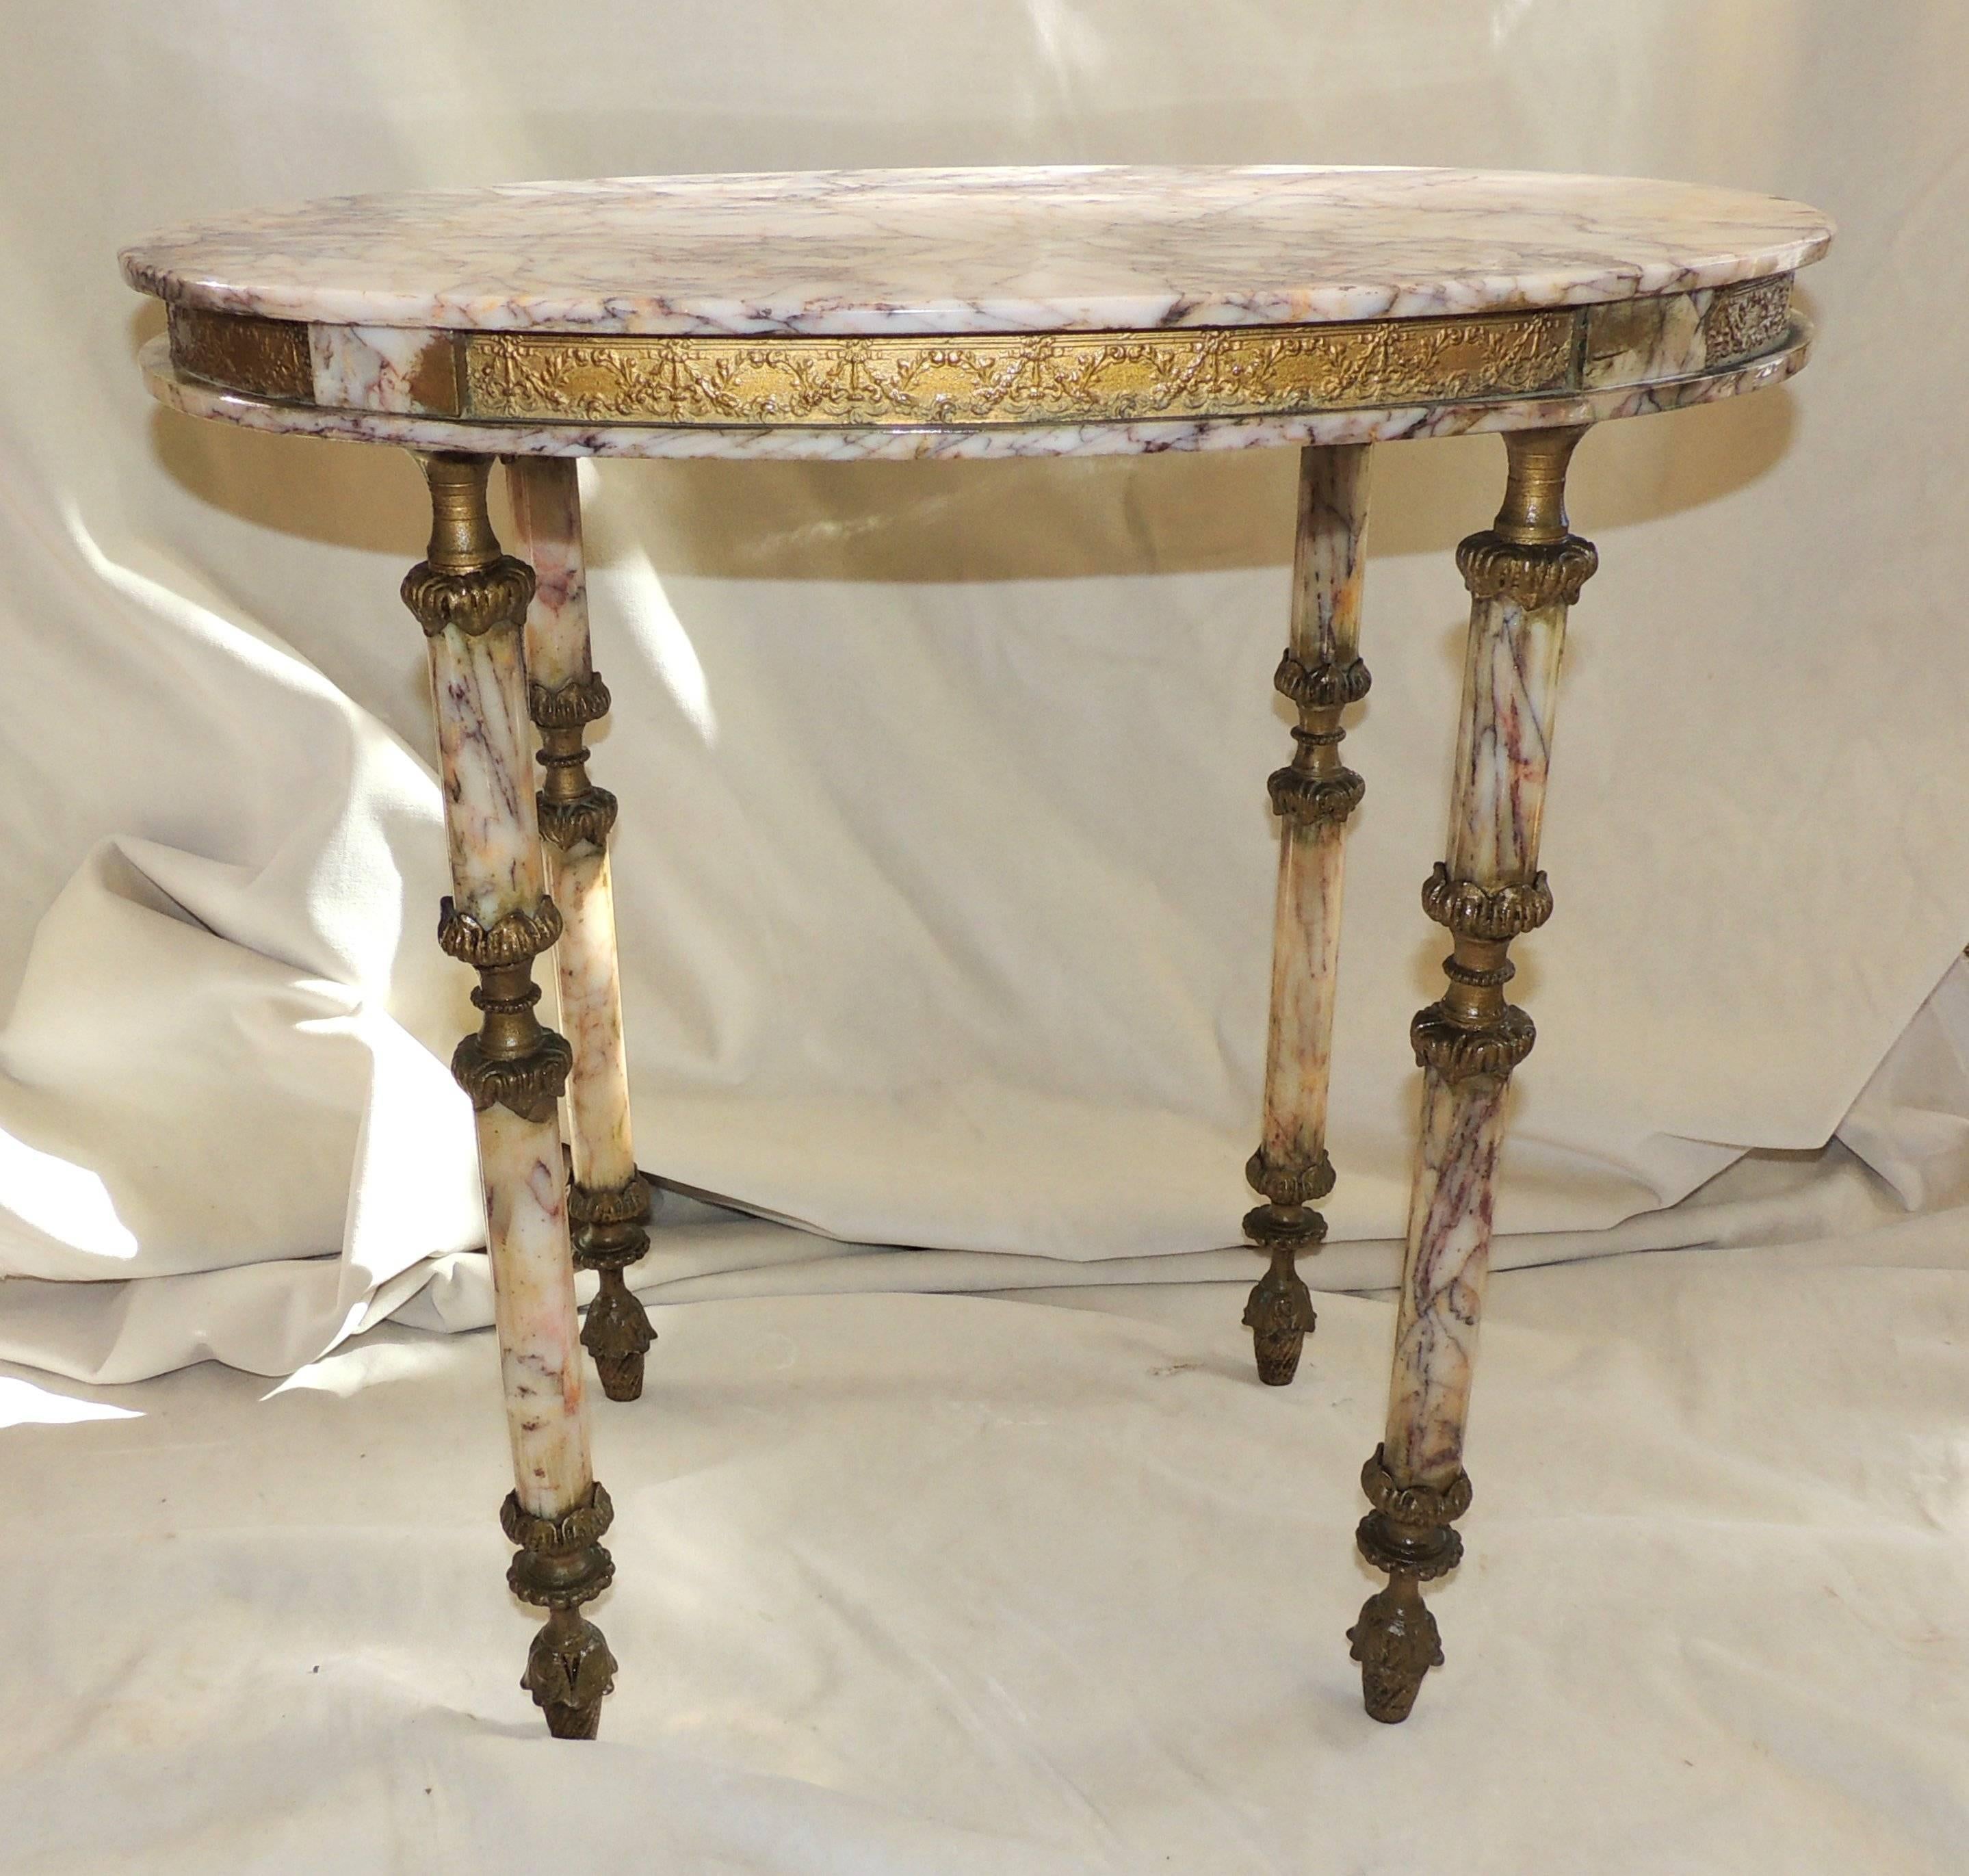 Beautiful marble-top and legs with doré bronze ormolu swag accents on the legs and along sides of the table.

Measures: 22.5" L x 16" W x 22.5" H.